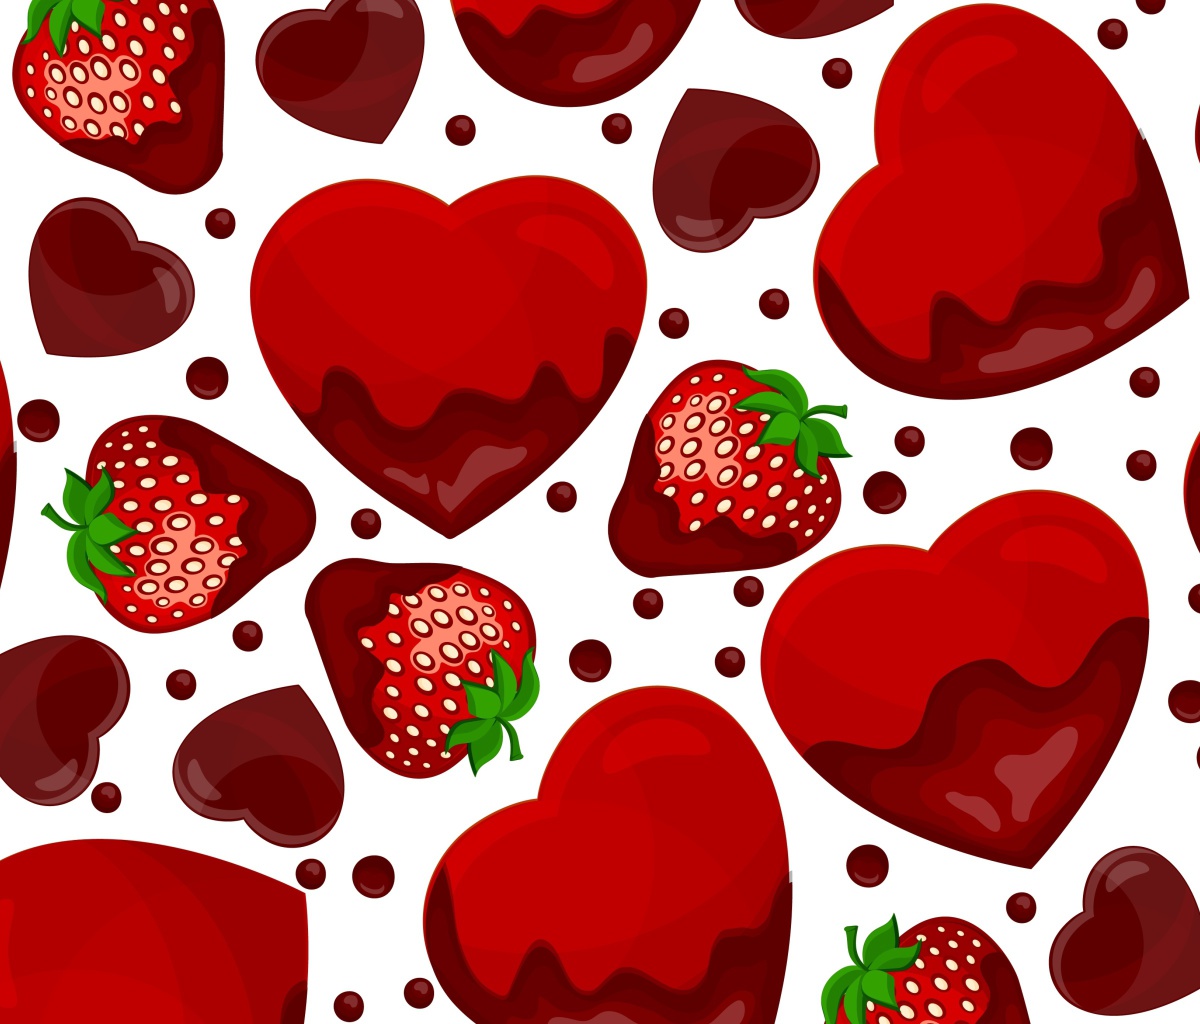 Strawberry and Hearts wallpaper 1200x1024